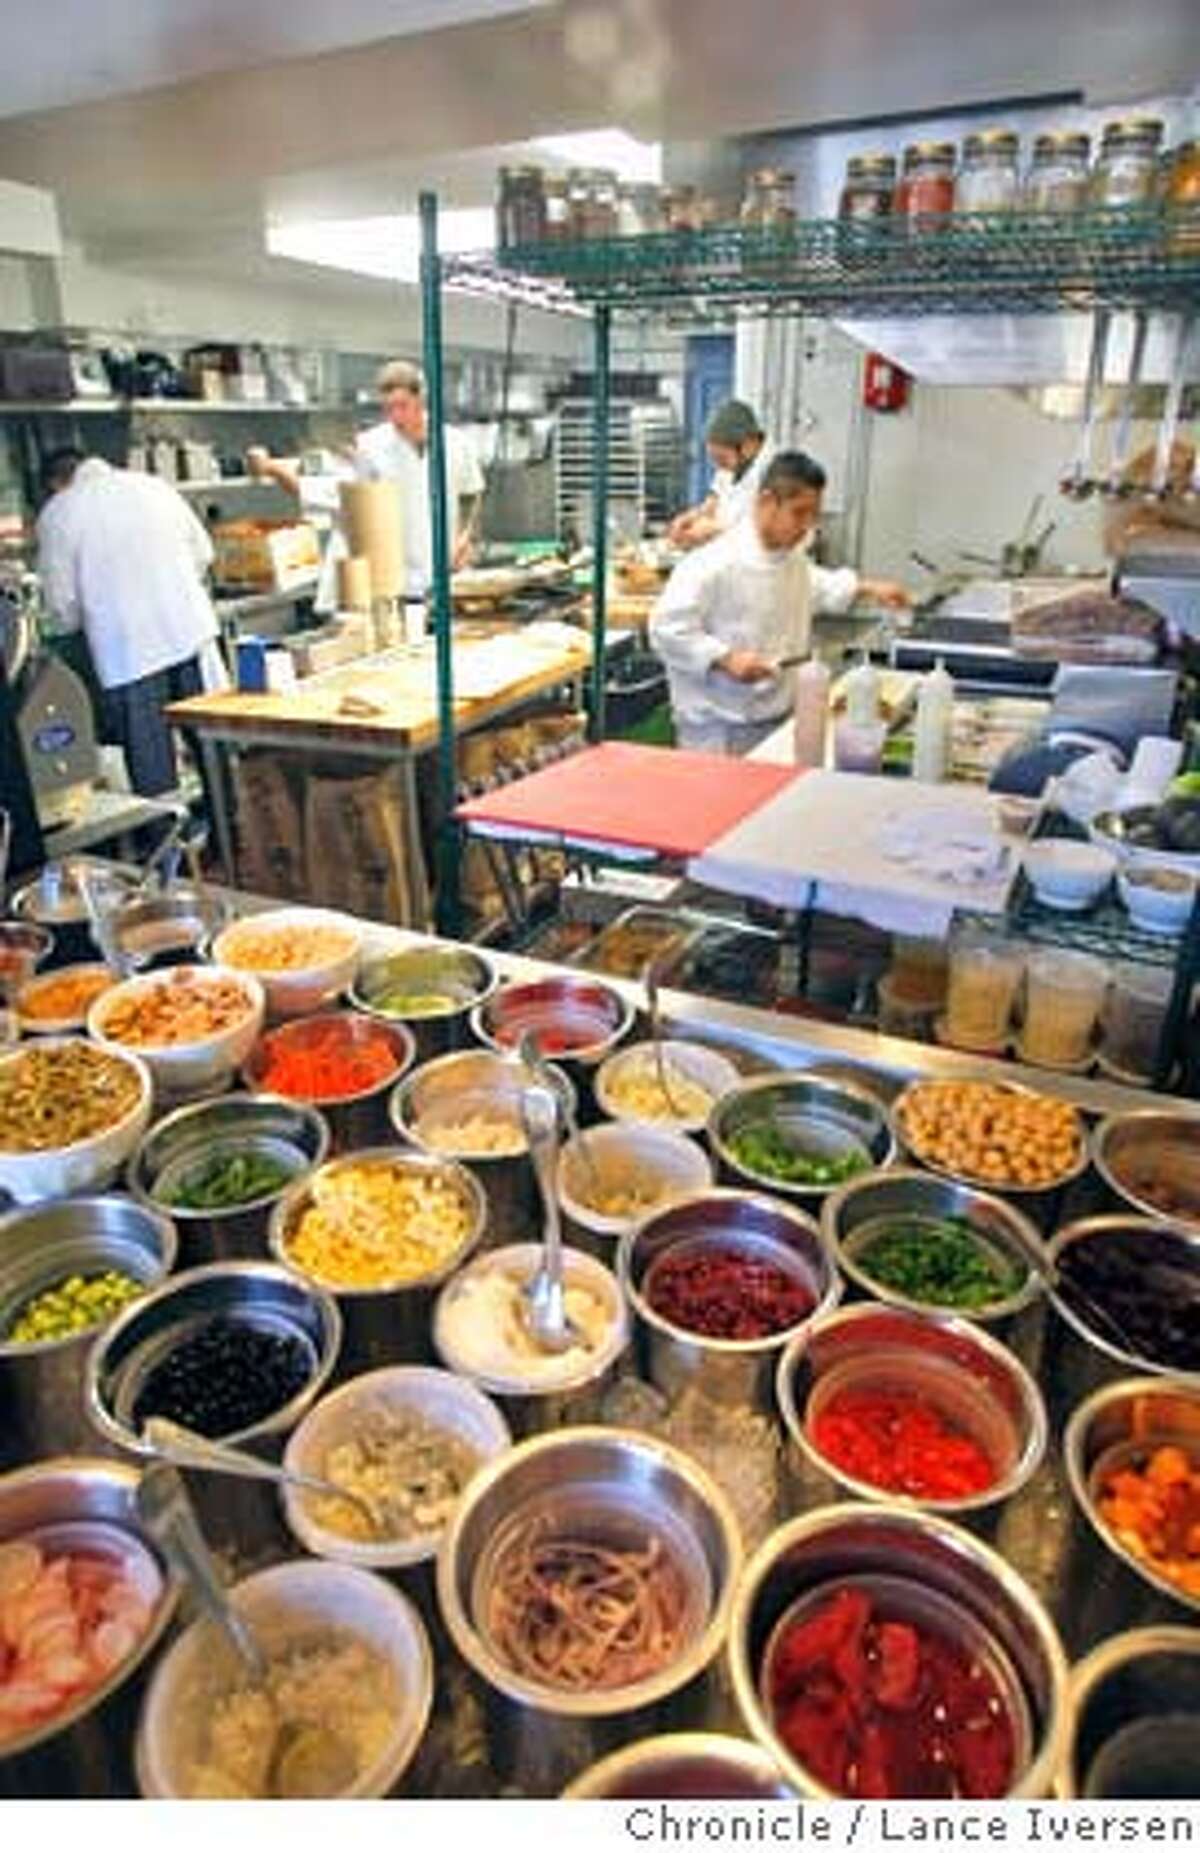 Chefs have a large variety of spices and condiments at their disposal as they prepare meals at the Blue Barn Gourmet Deli at 2105 Chestnut St. near Steiner in San Francisco. By Lance Iversen/The Chronicle